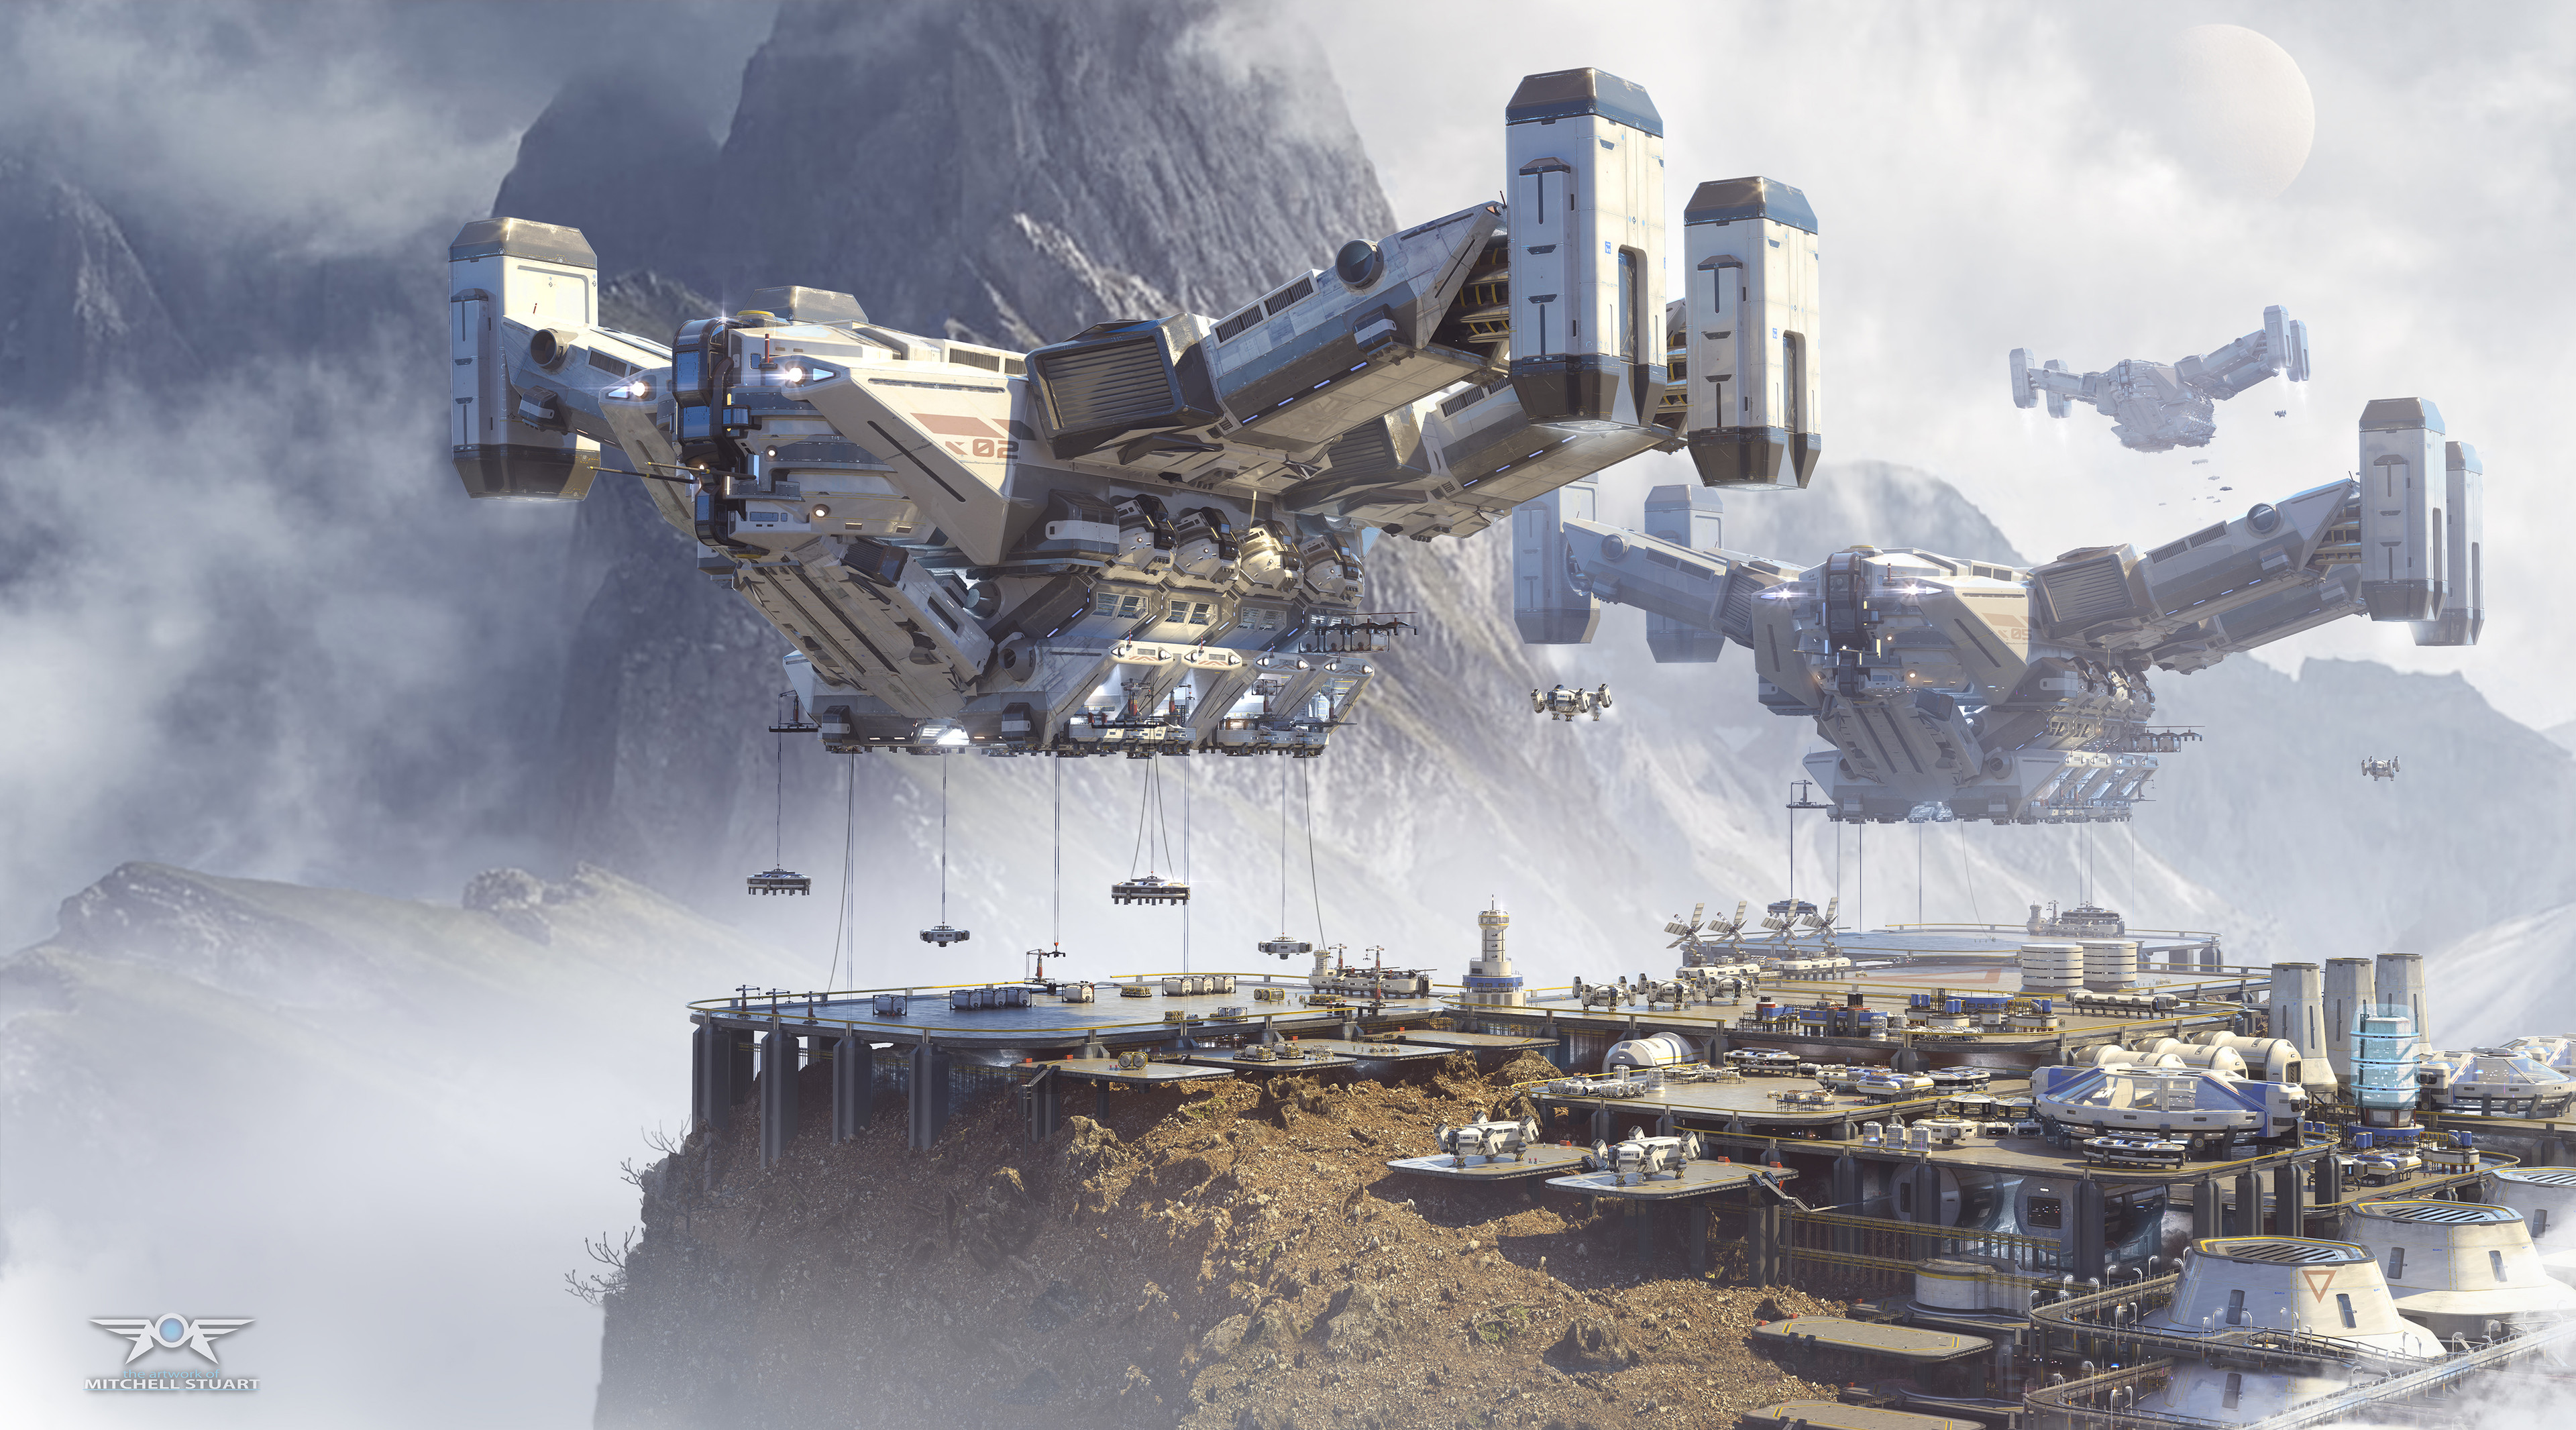 General 3840x2132 science fiction science helicopters jet engine lift off cargo city mountains clouds white blue brown dock fantasy art futuristic Mitchell Stuart